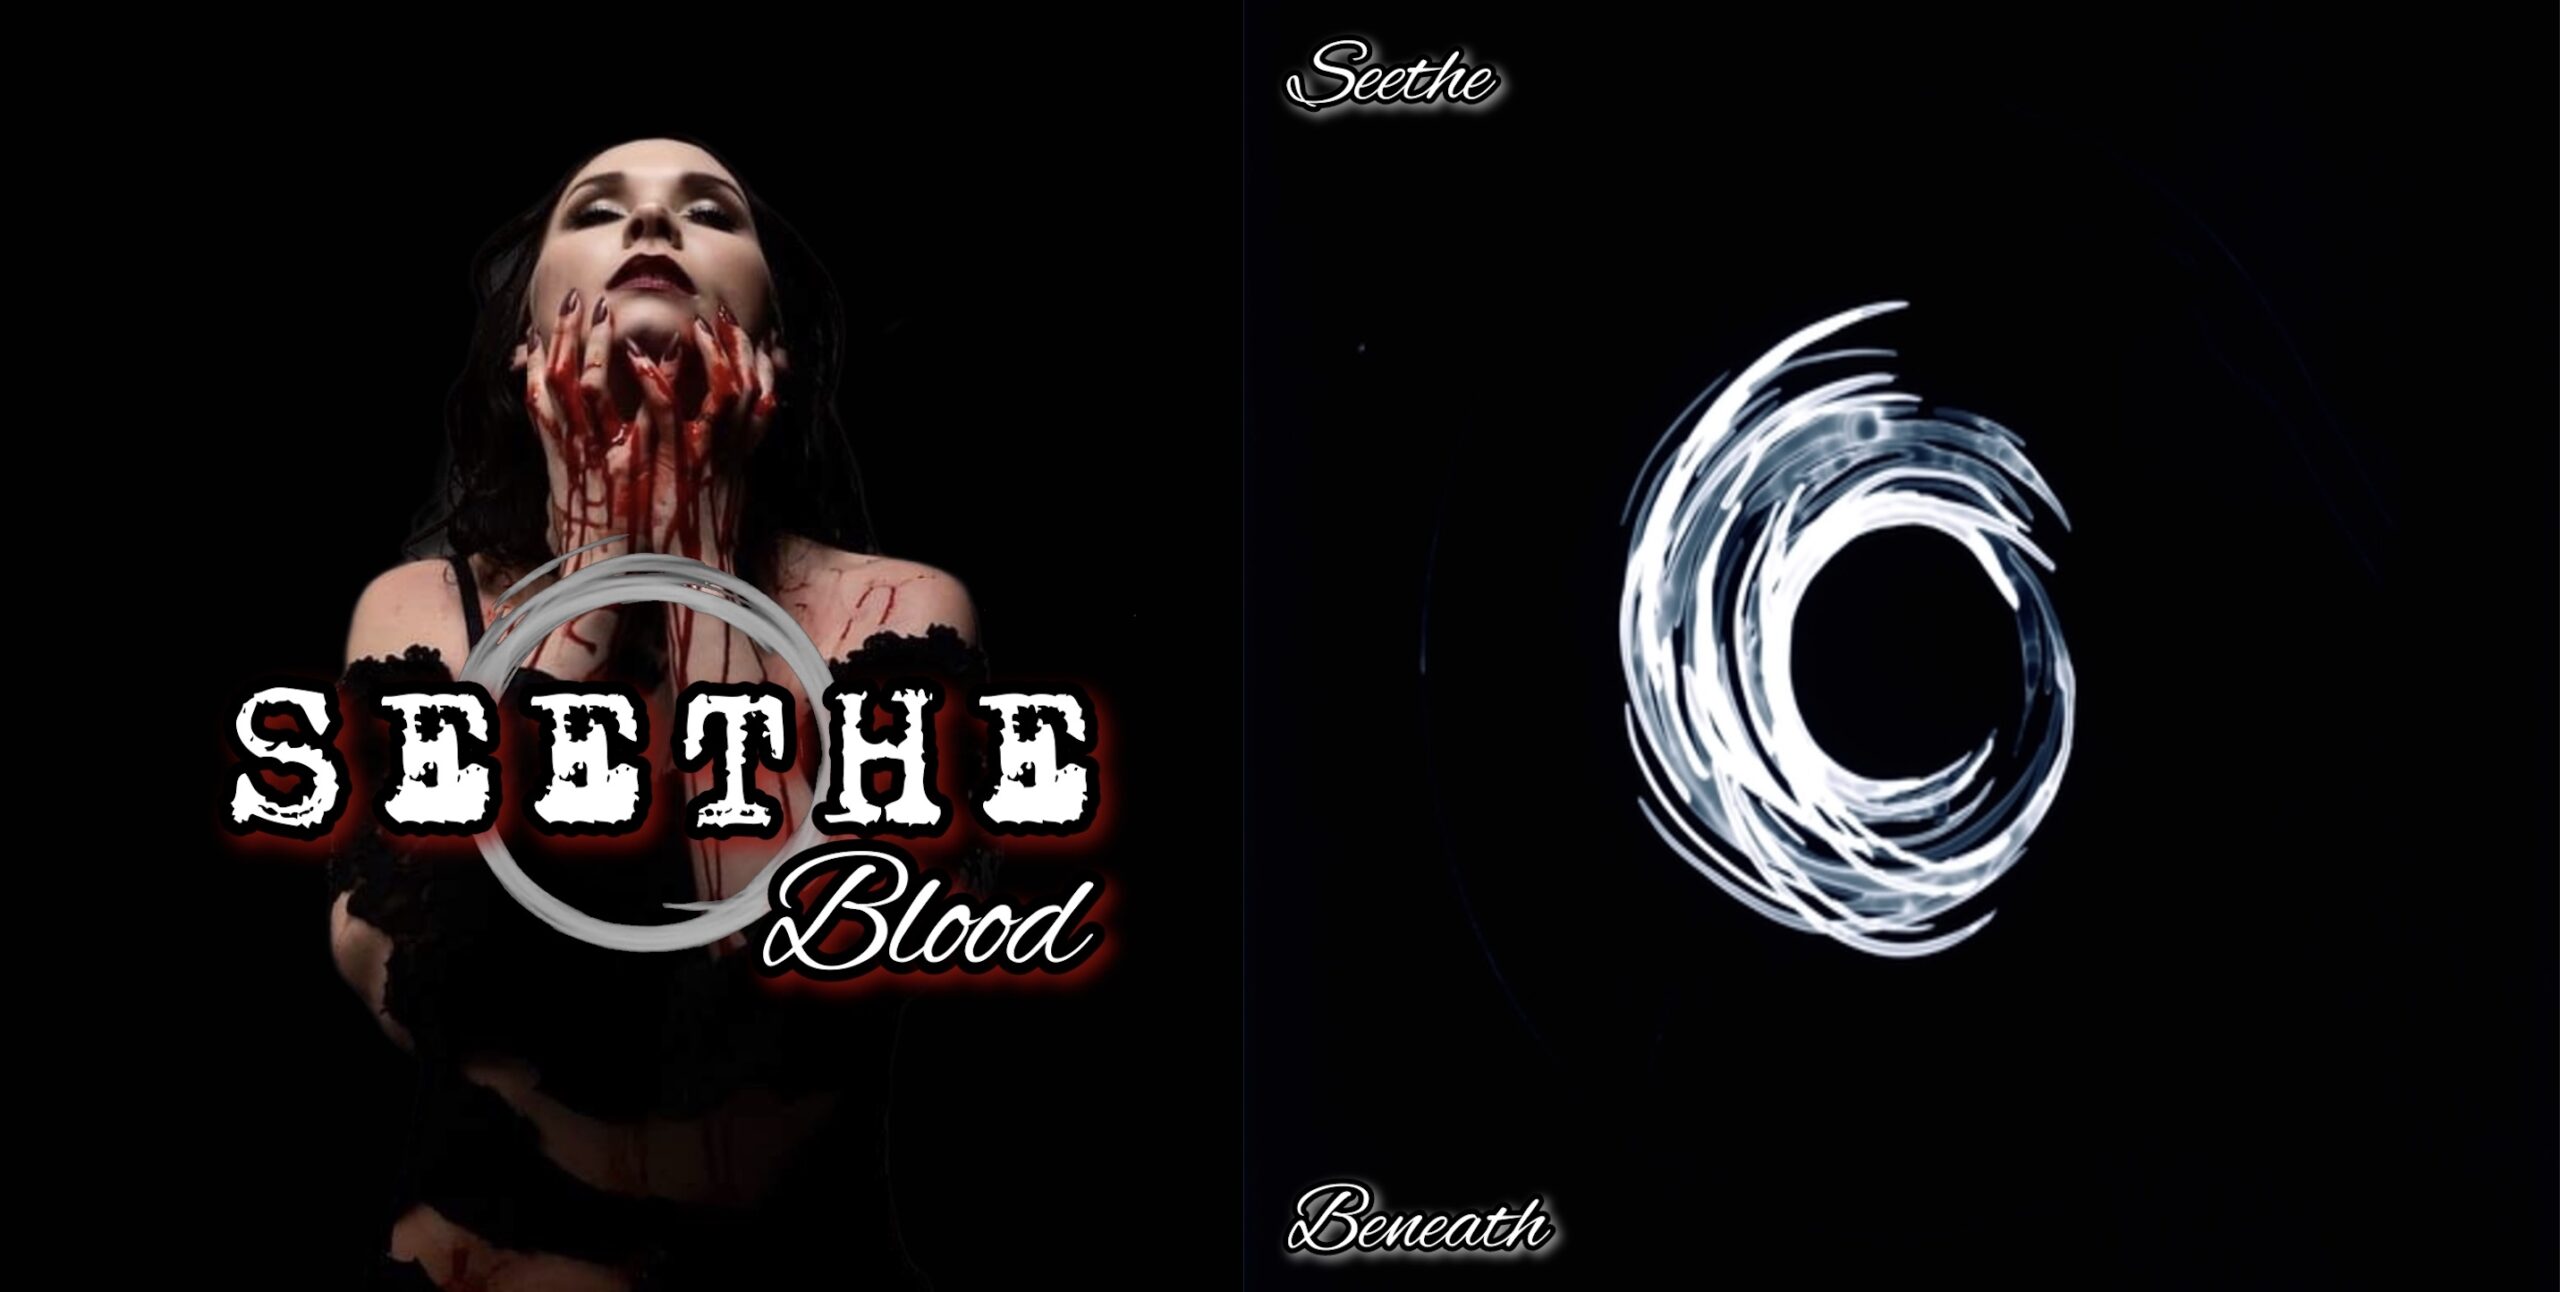 LISTEN: “Blood” and “Beneath” by Seethe